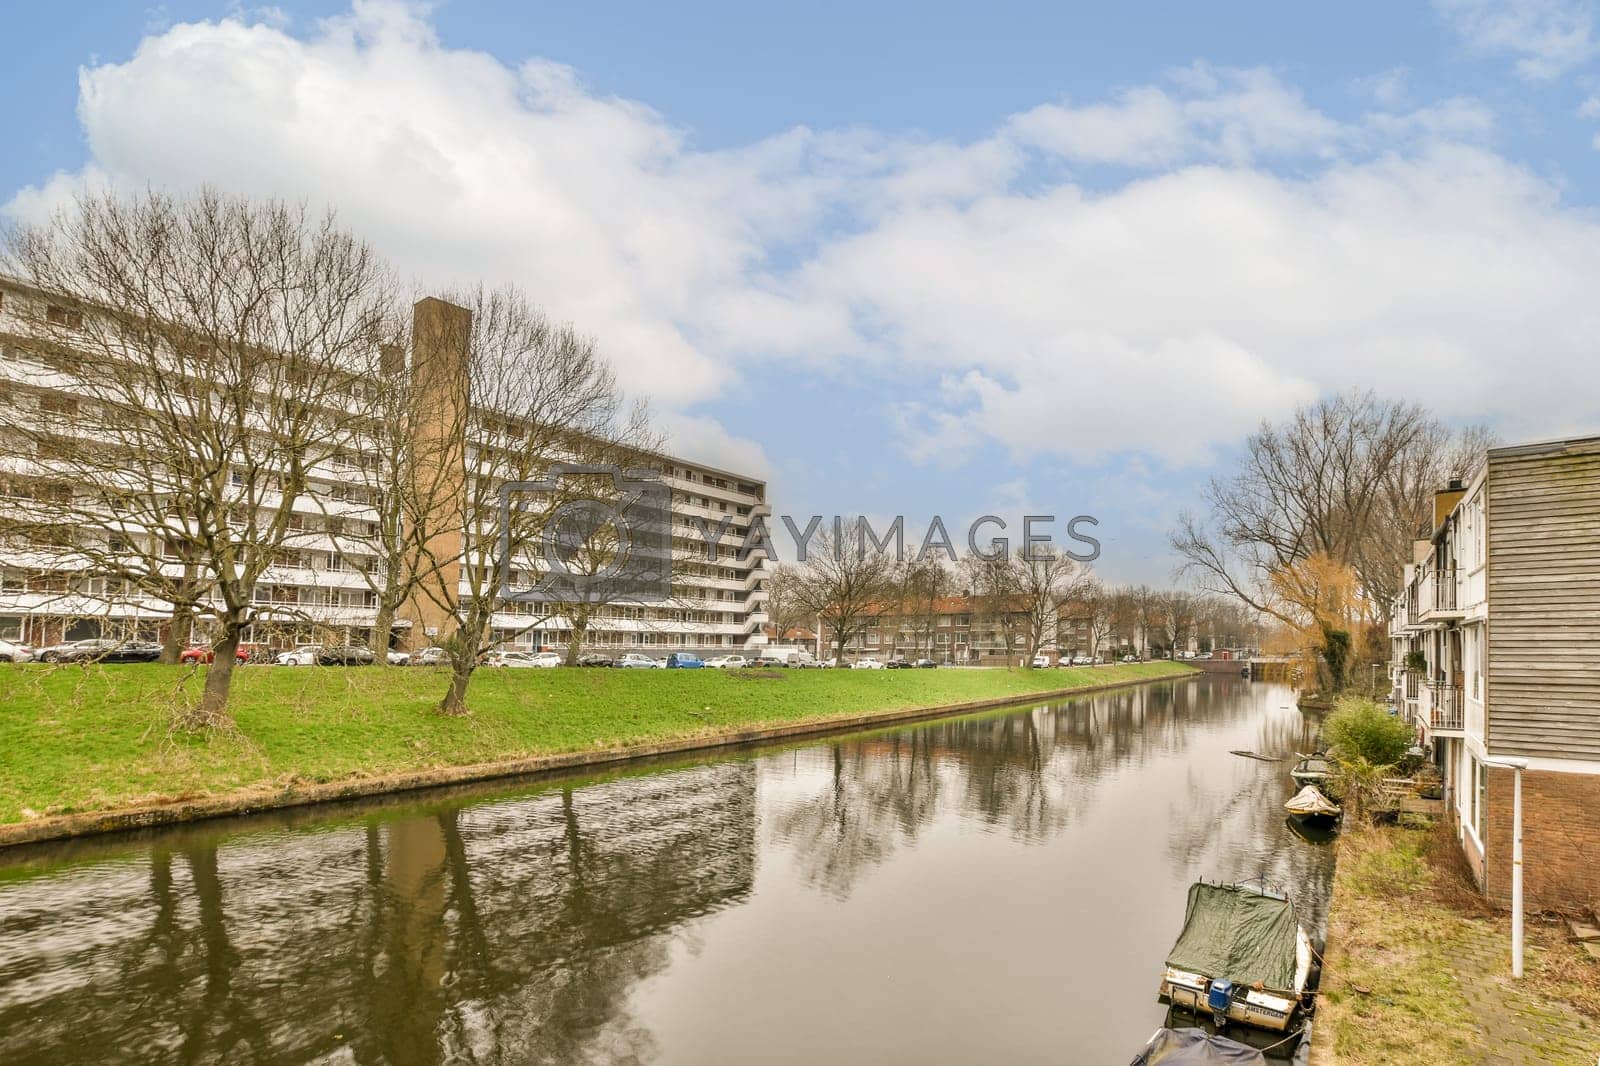 Royalty free image of a canal with houses and a building on the side by casamedia